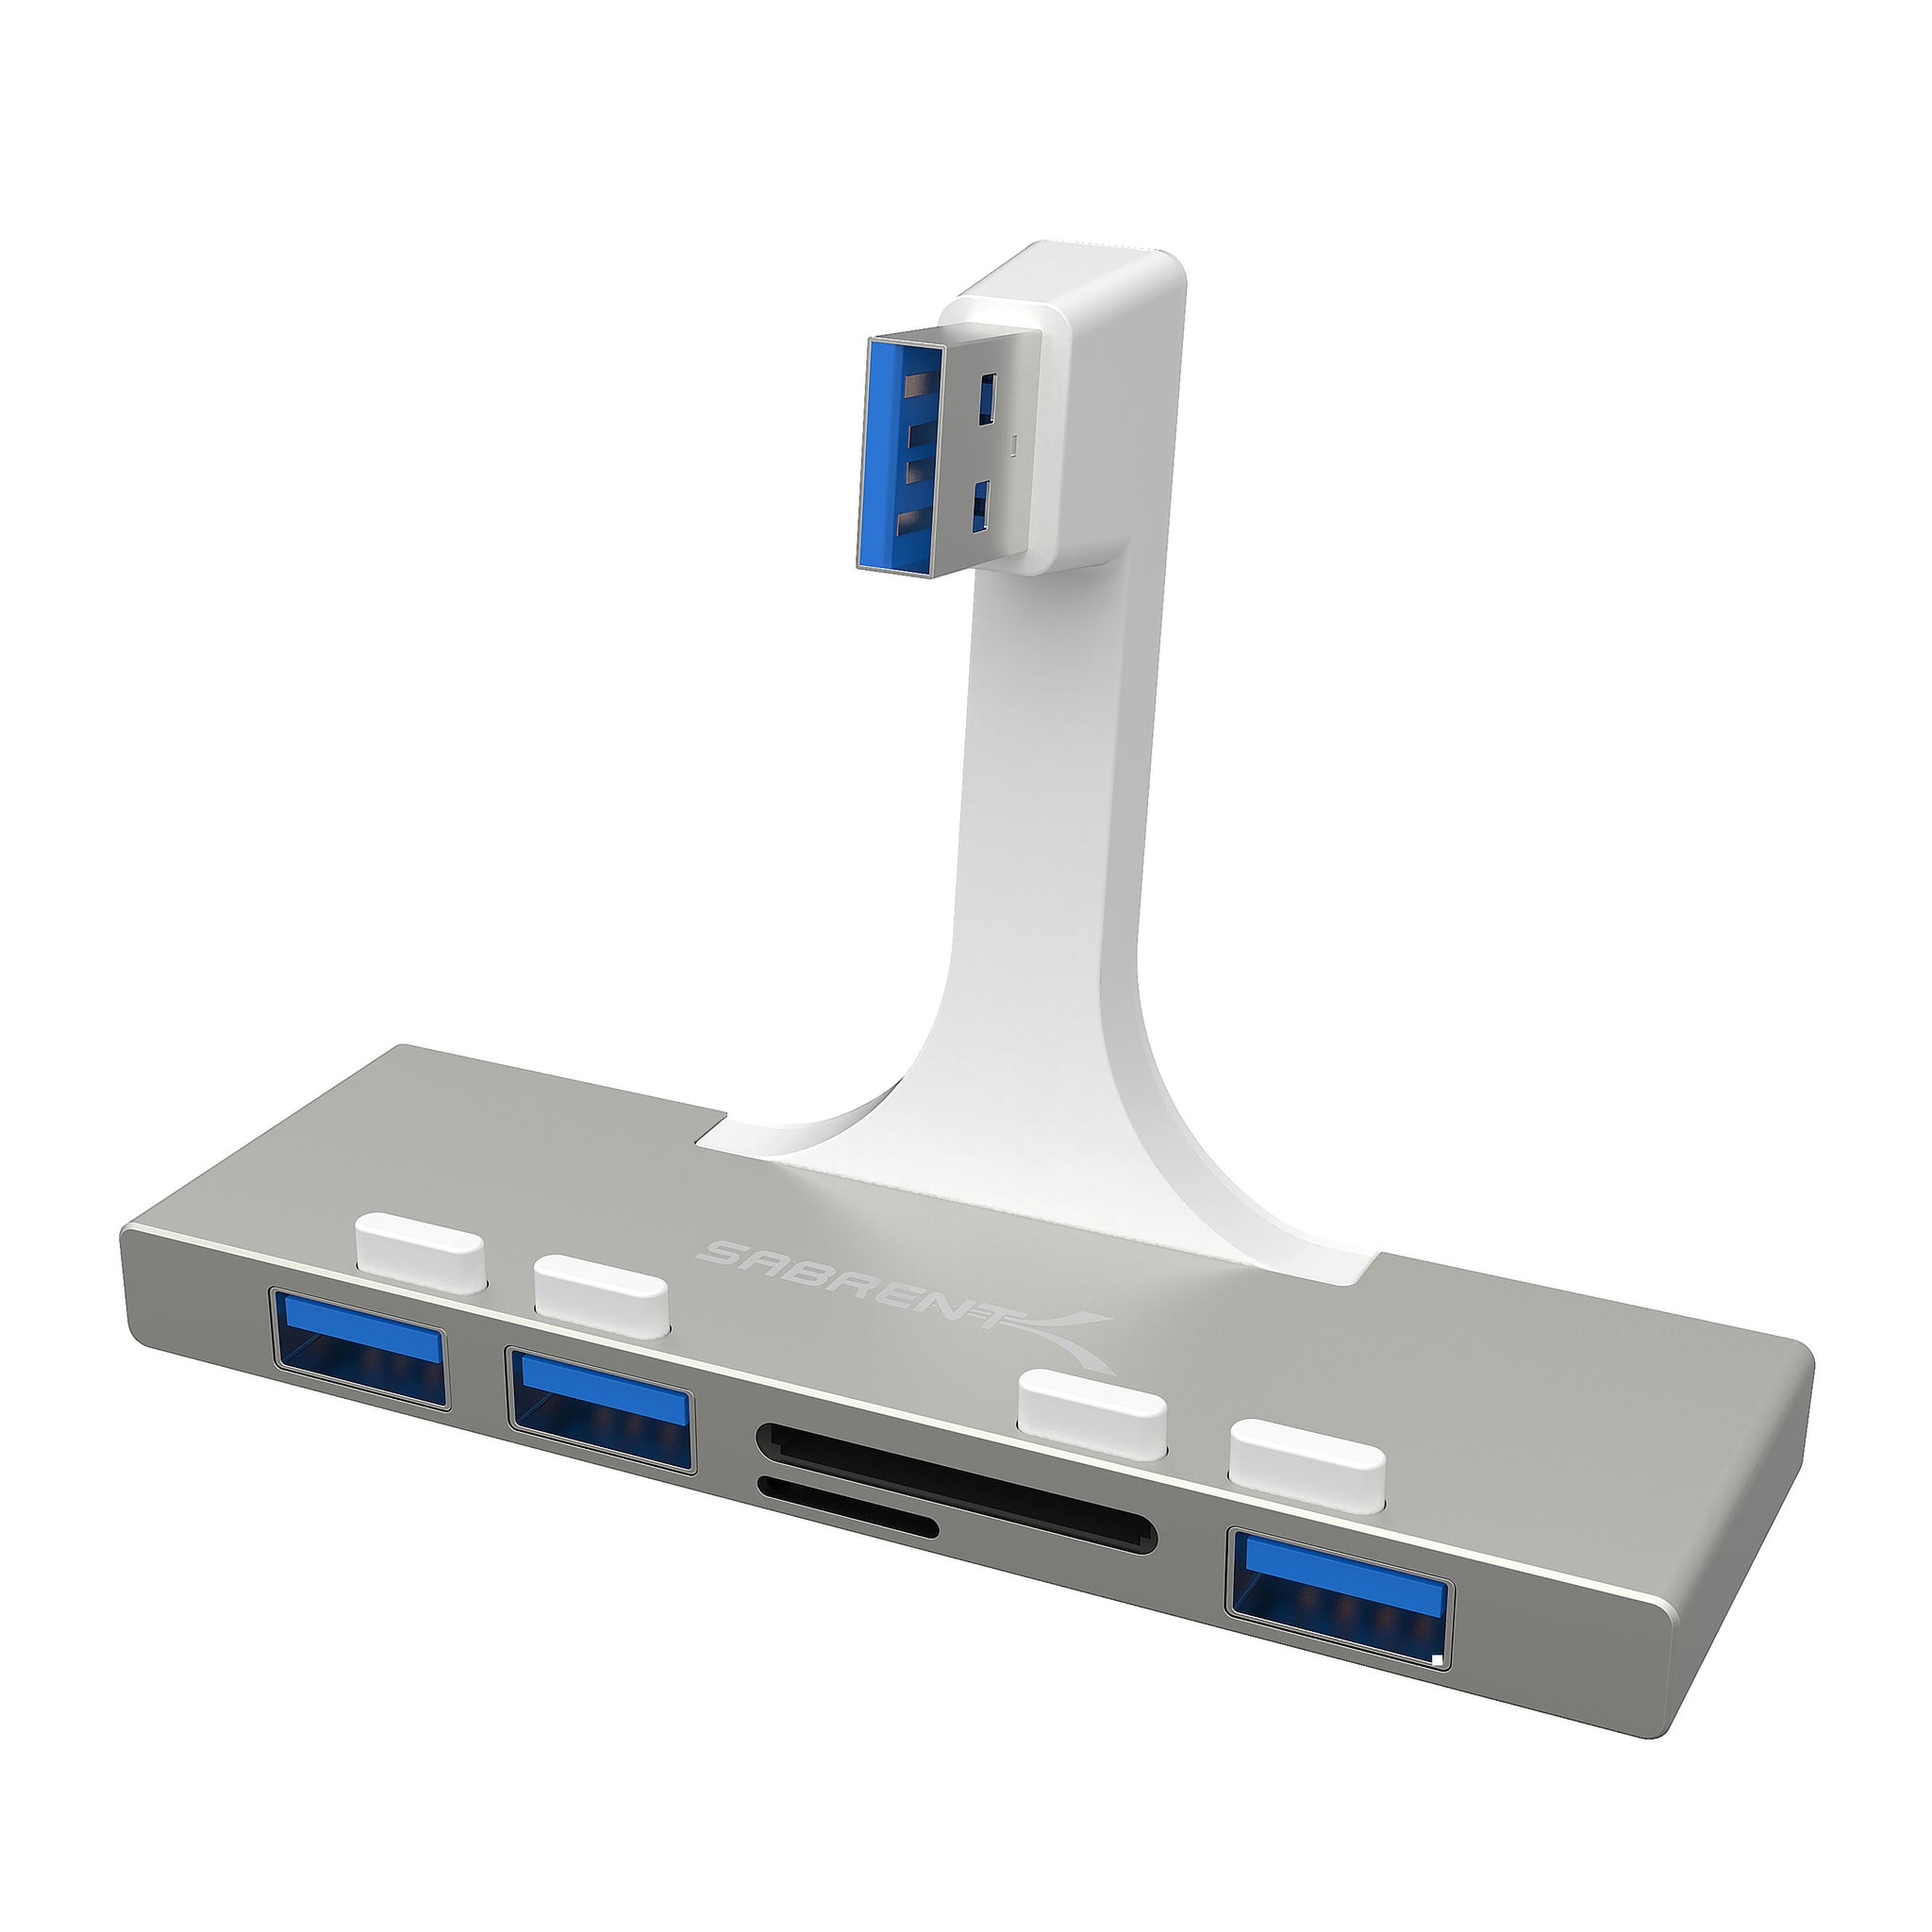 3 Port USB 3.0 Hub with SD/Micro SD Card Reader - Sabrent